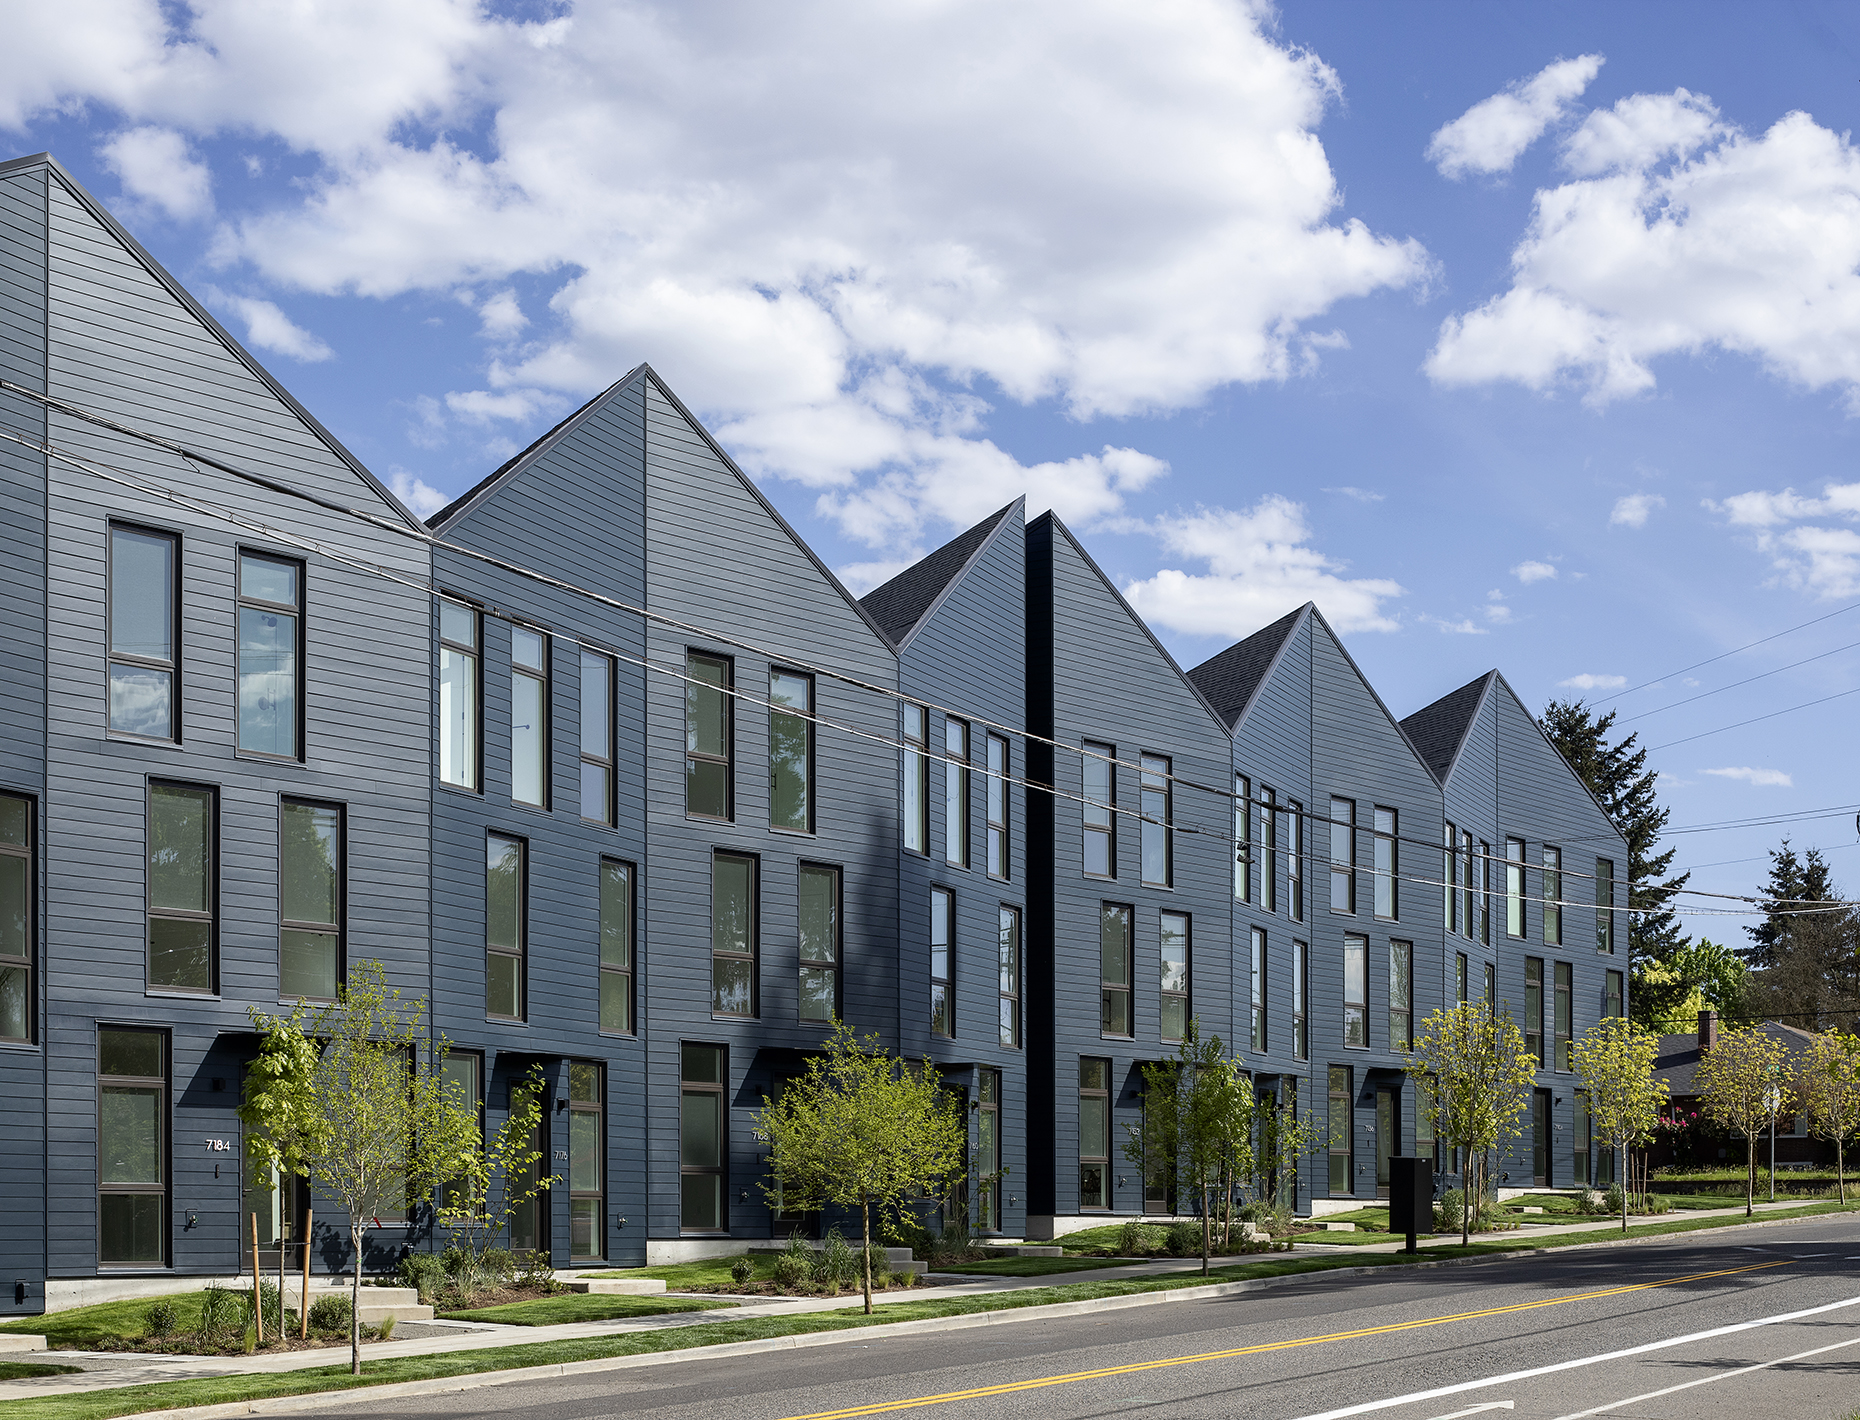 Exterior shot of origami-inspired townhouses in Portland clad in timber